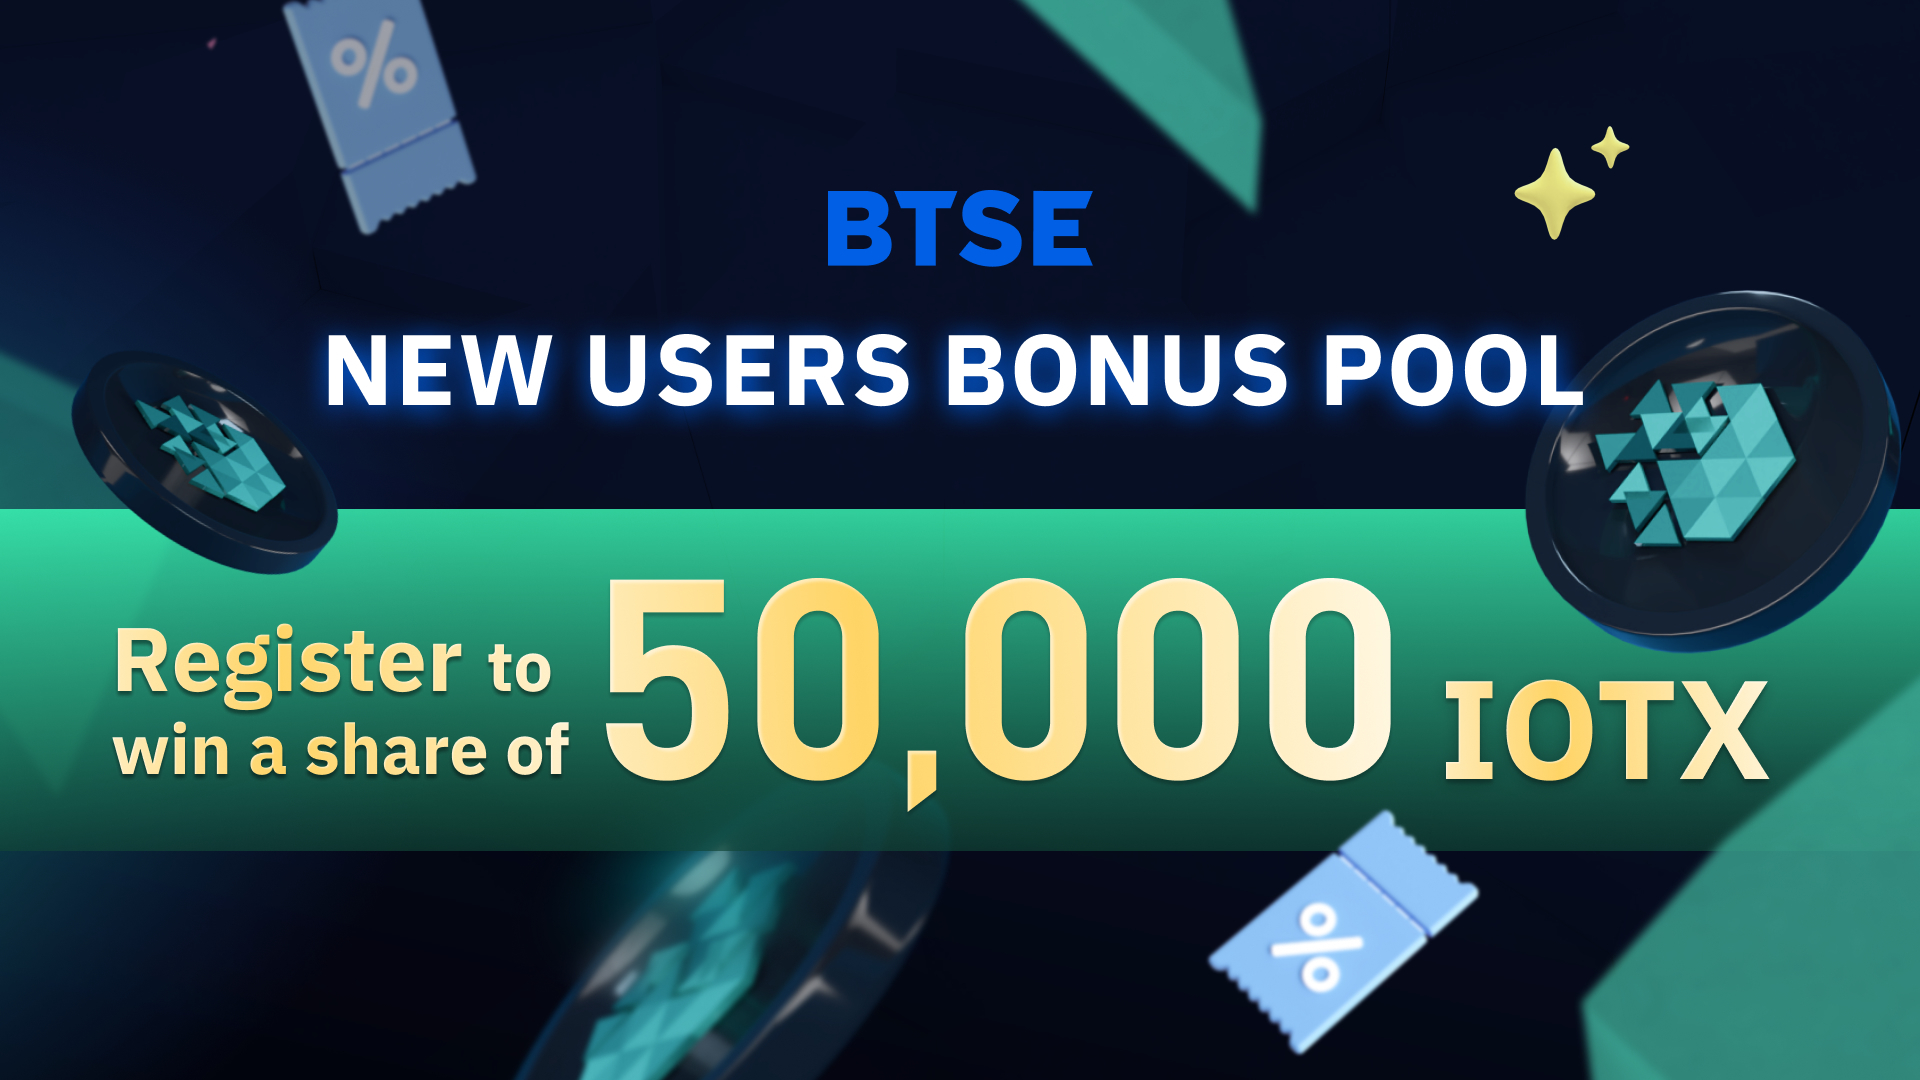 Welcome Bonus Pool for New Users